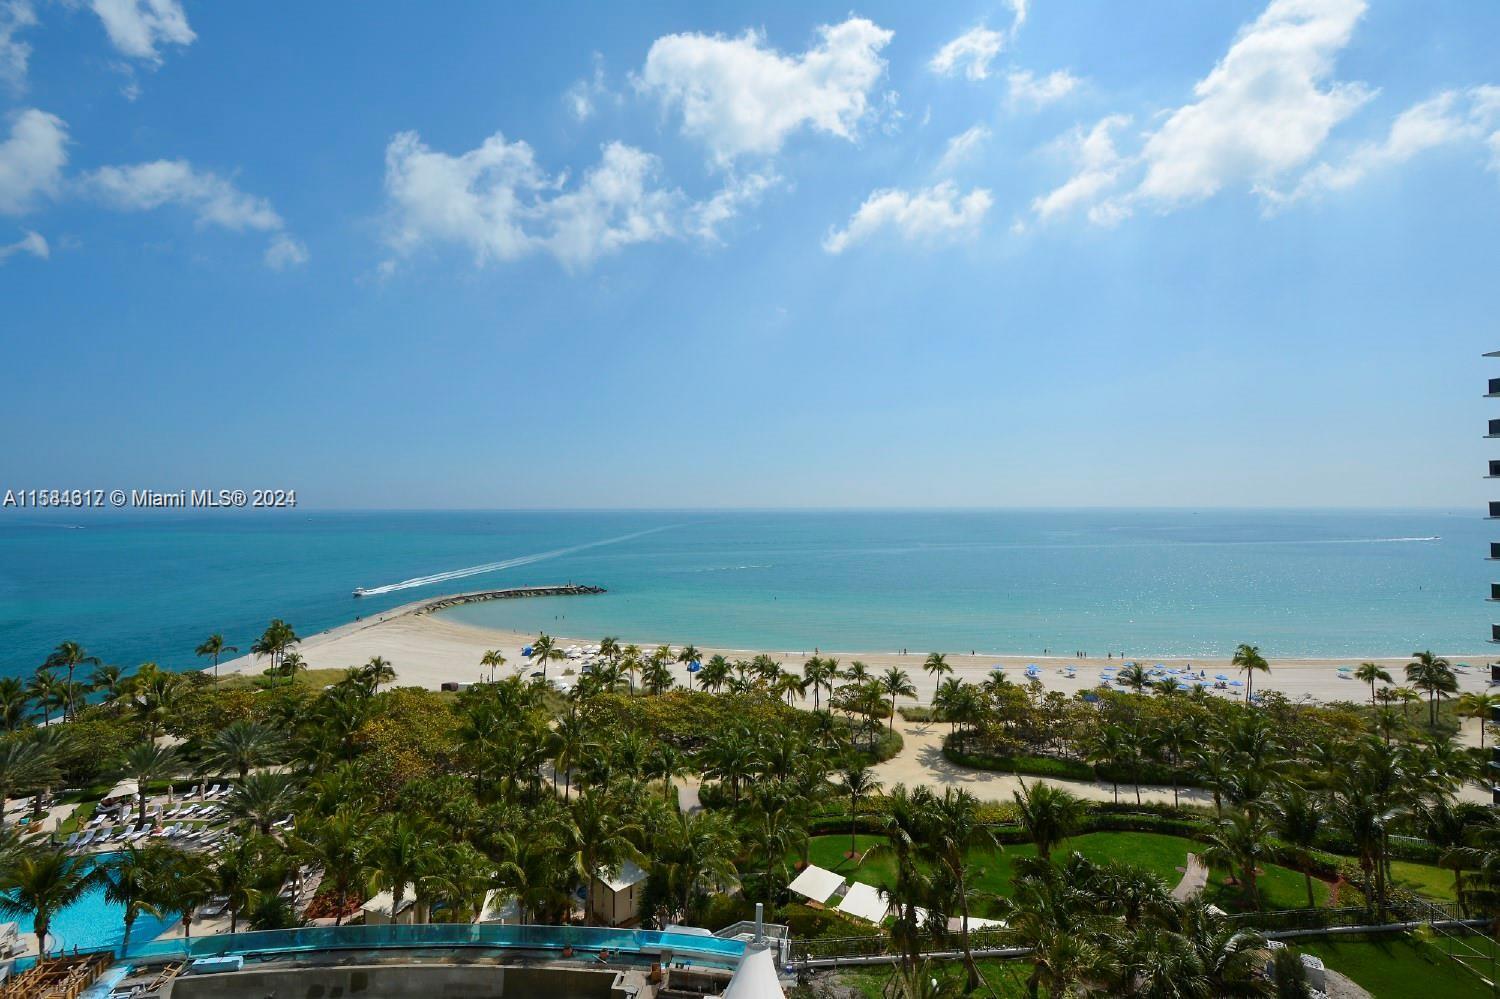 Best 2 Bdr line in the building. Beautiful direct oceanfront 2/2.5 corner unit with 10 FT ceilings, floor to ceiling glass and stunning unobstructed ocean, inlet, city and bay views. The most luxurious living in Bal Harbour offering 5 stars amenities, 24Hr concierge and security, valet parking, beach service,fitness center, 2 pools, Spa, dining, bar, residents theatre, party room. High end appliances including Wolf, Miele, Subzero, Bosch.. European cabinetry. Marble floor. Lots of storage. Laundry room. Fully furnished. Text Listing Agent for showings.